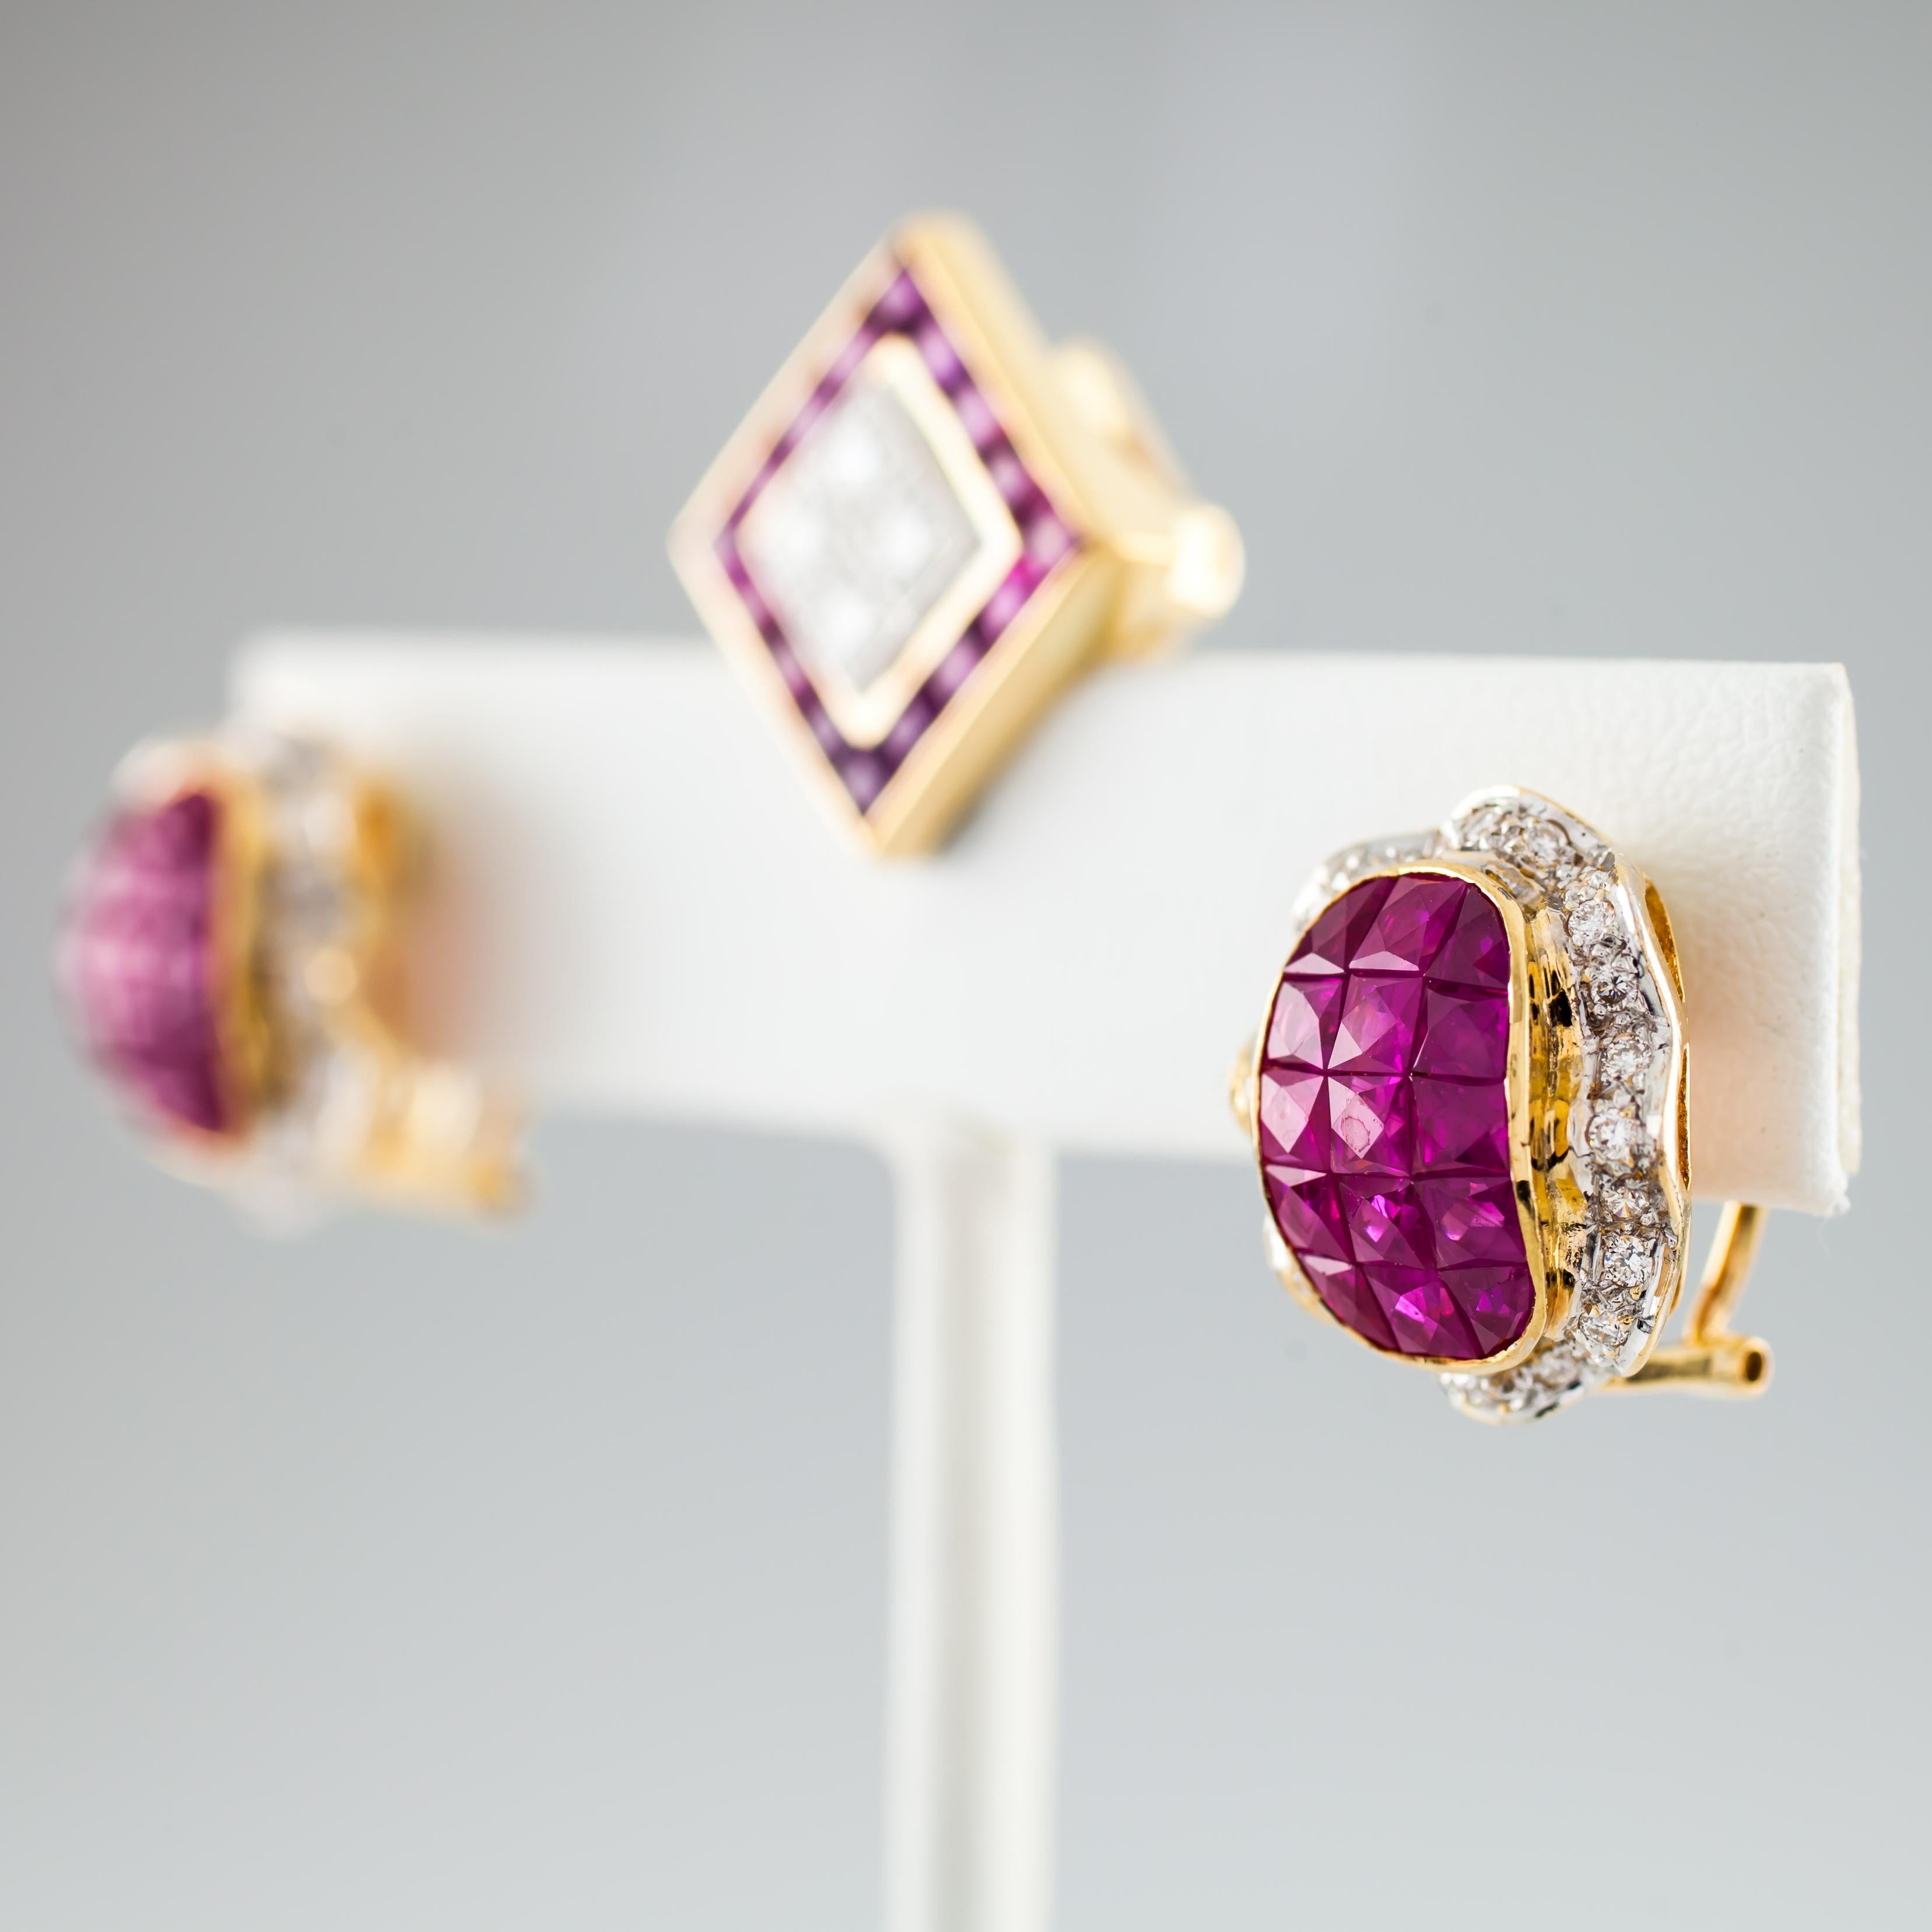 Jewelry Set Includes Stunning Insivibly set Ruby Plaque earrings with Diamond accents and a matching 